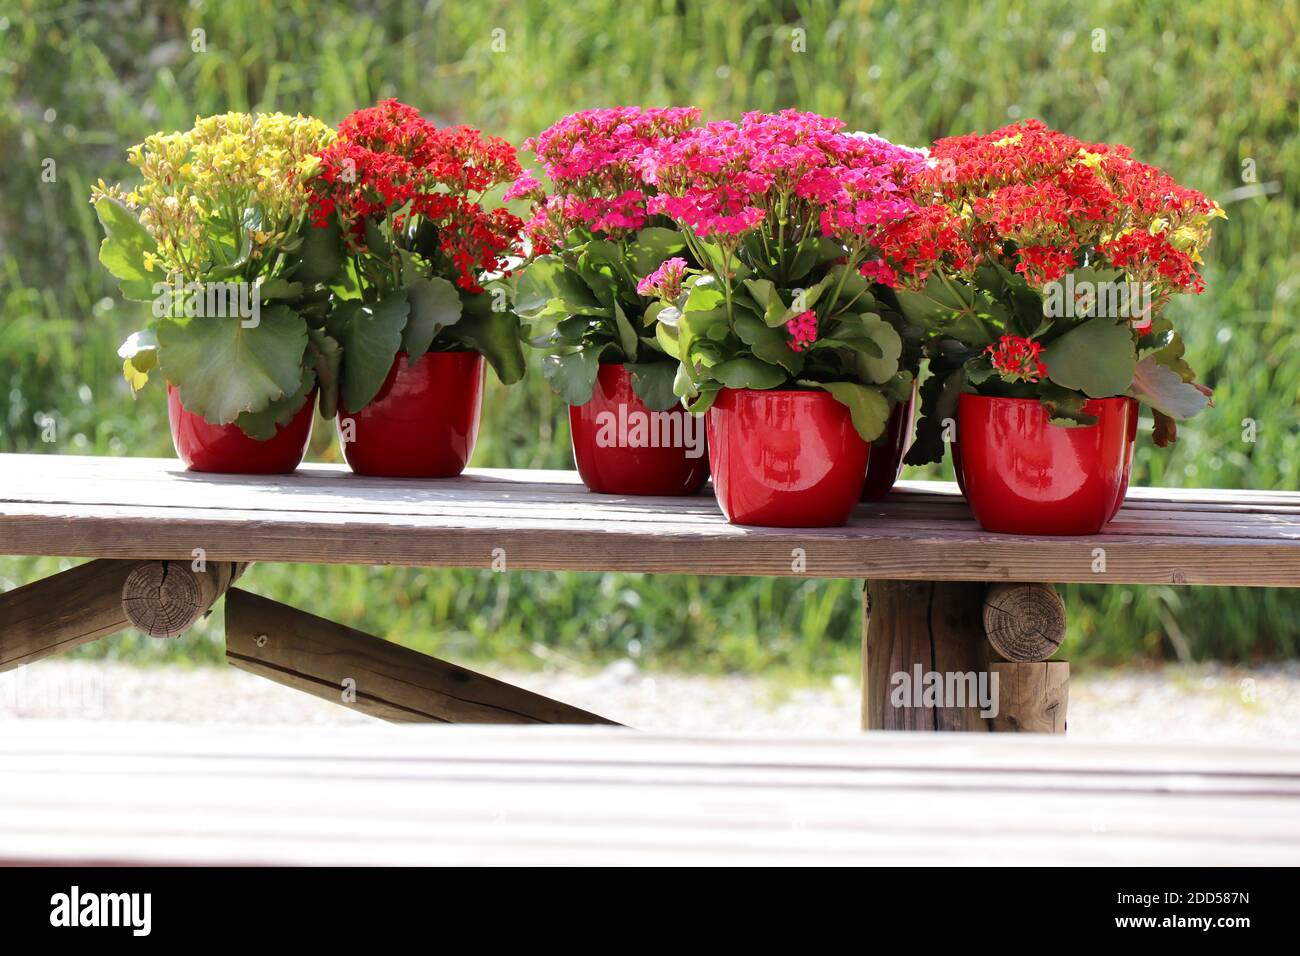 View on flowers in flowerpots in a row on a bench Stock Photo